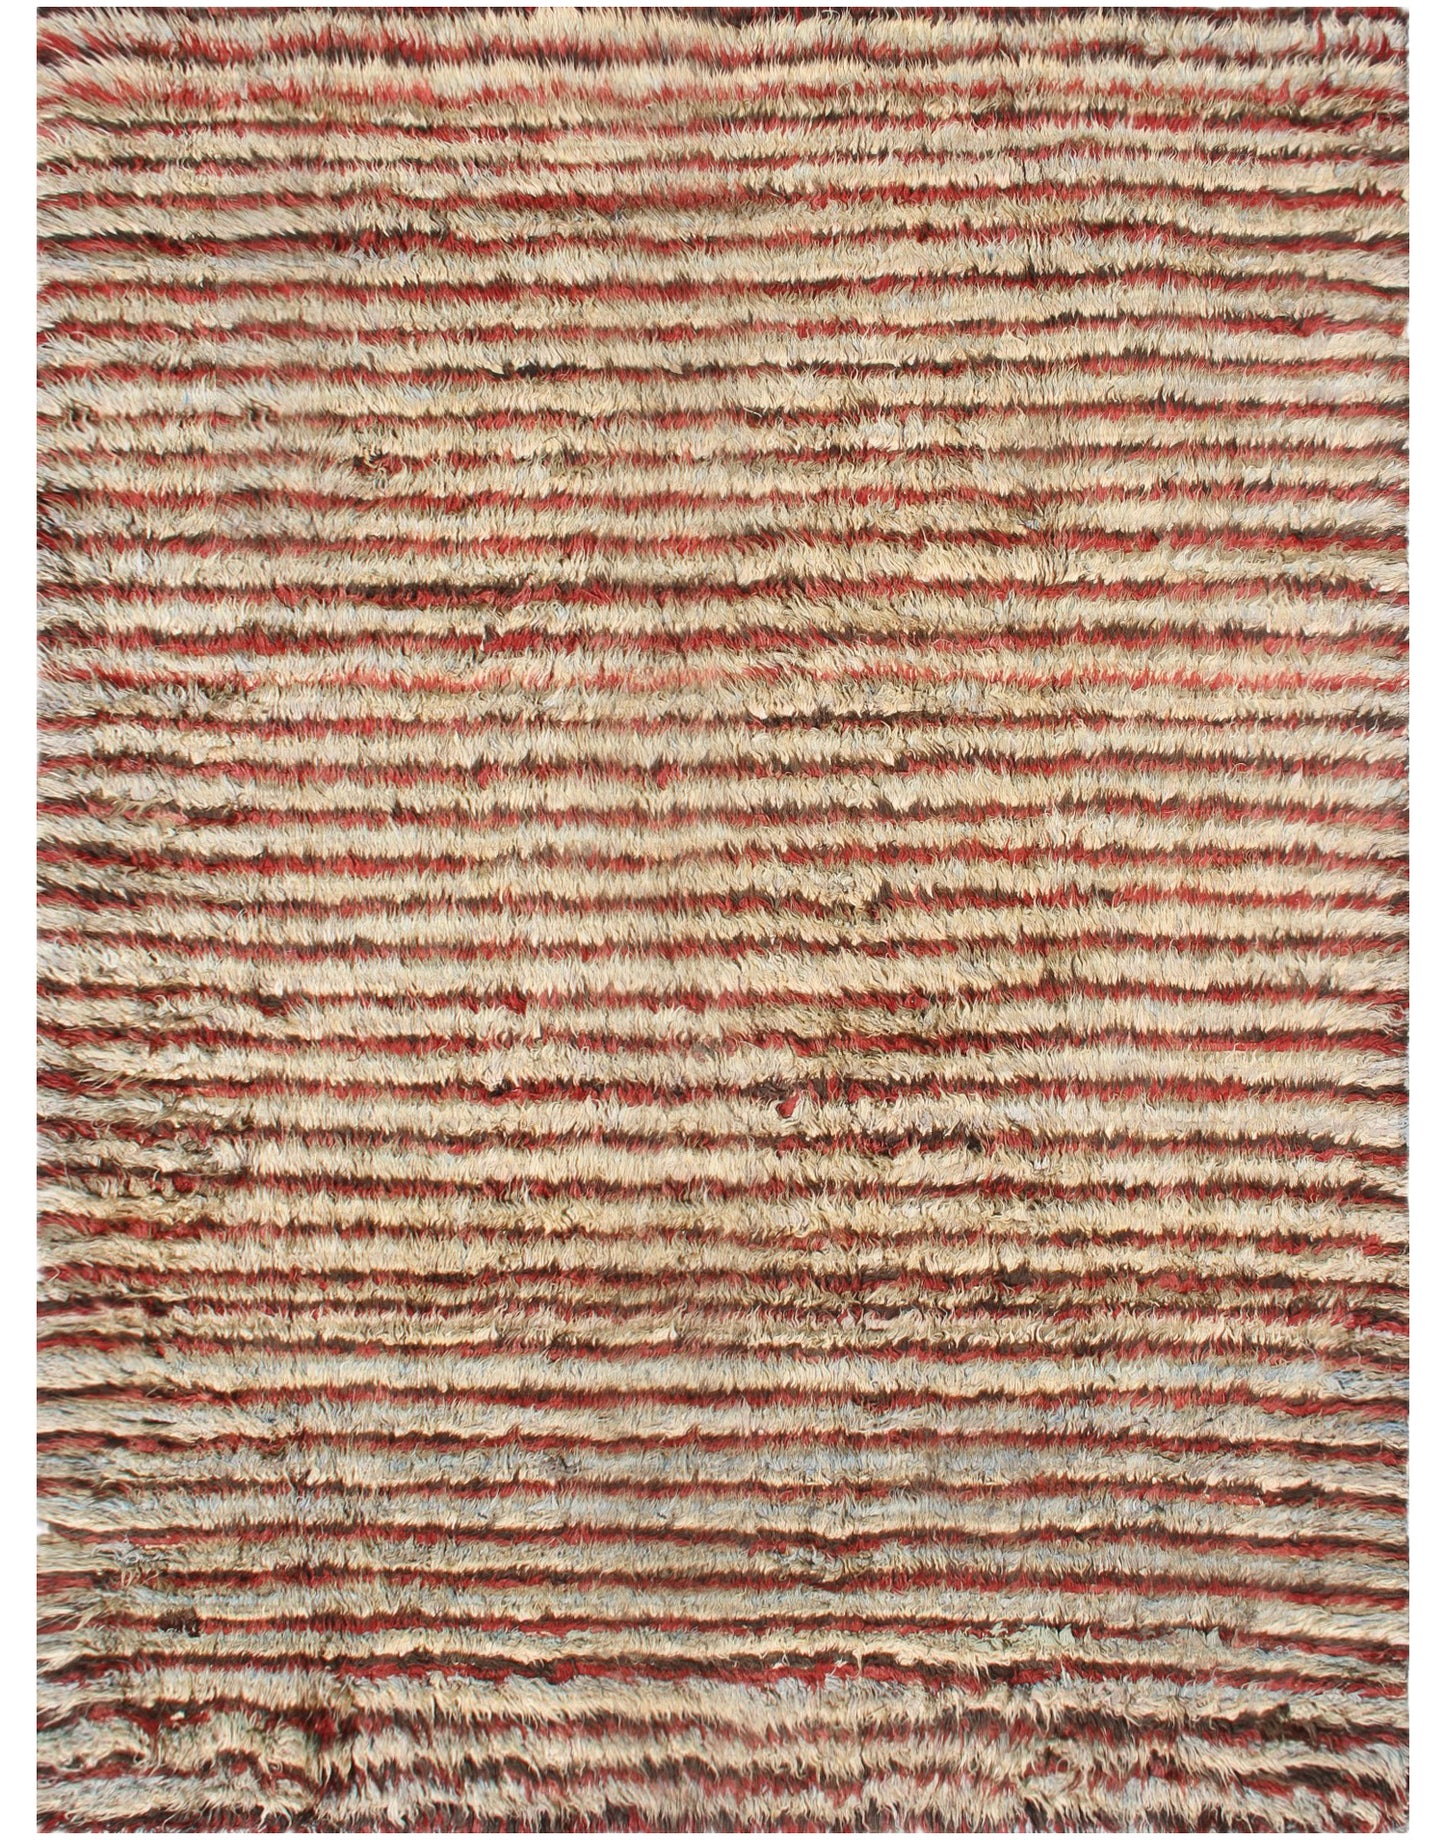 10'x13' Ariana Moroccan Style Colorful Striped Soft Shaggy Wool Barchi Rug